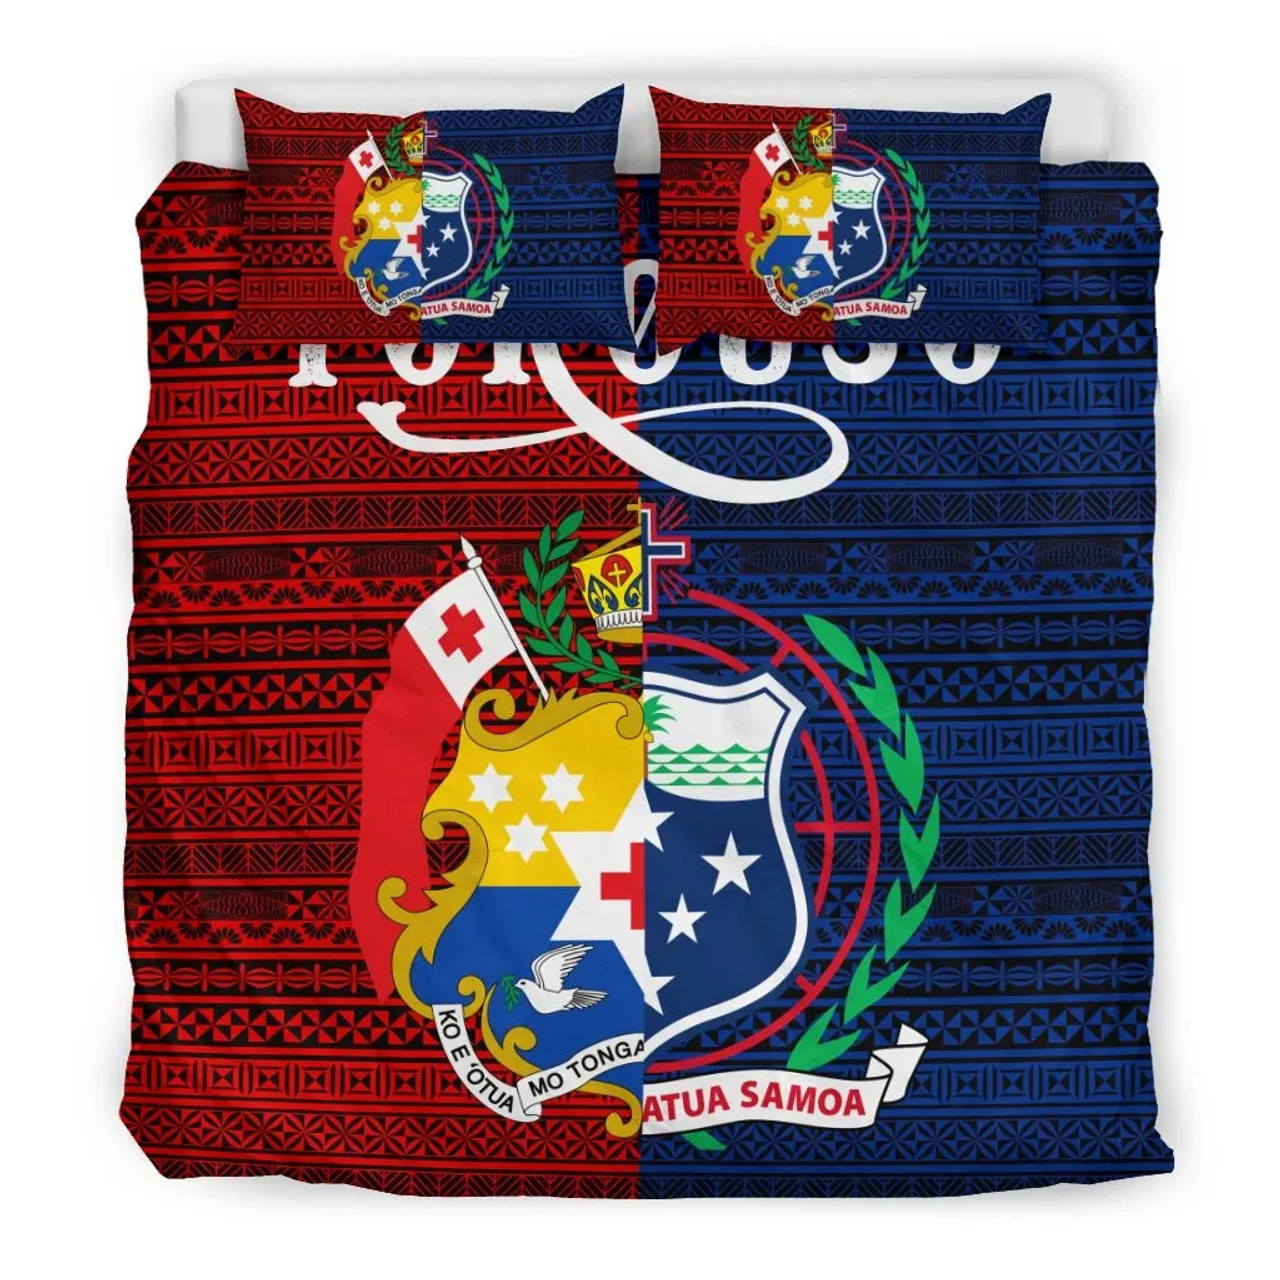 Tokouso Duvet Cover Set - Tokouso Coat Of Arms 1 1